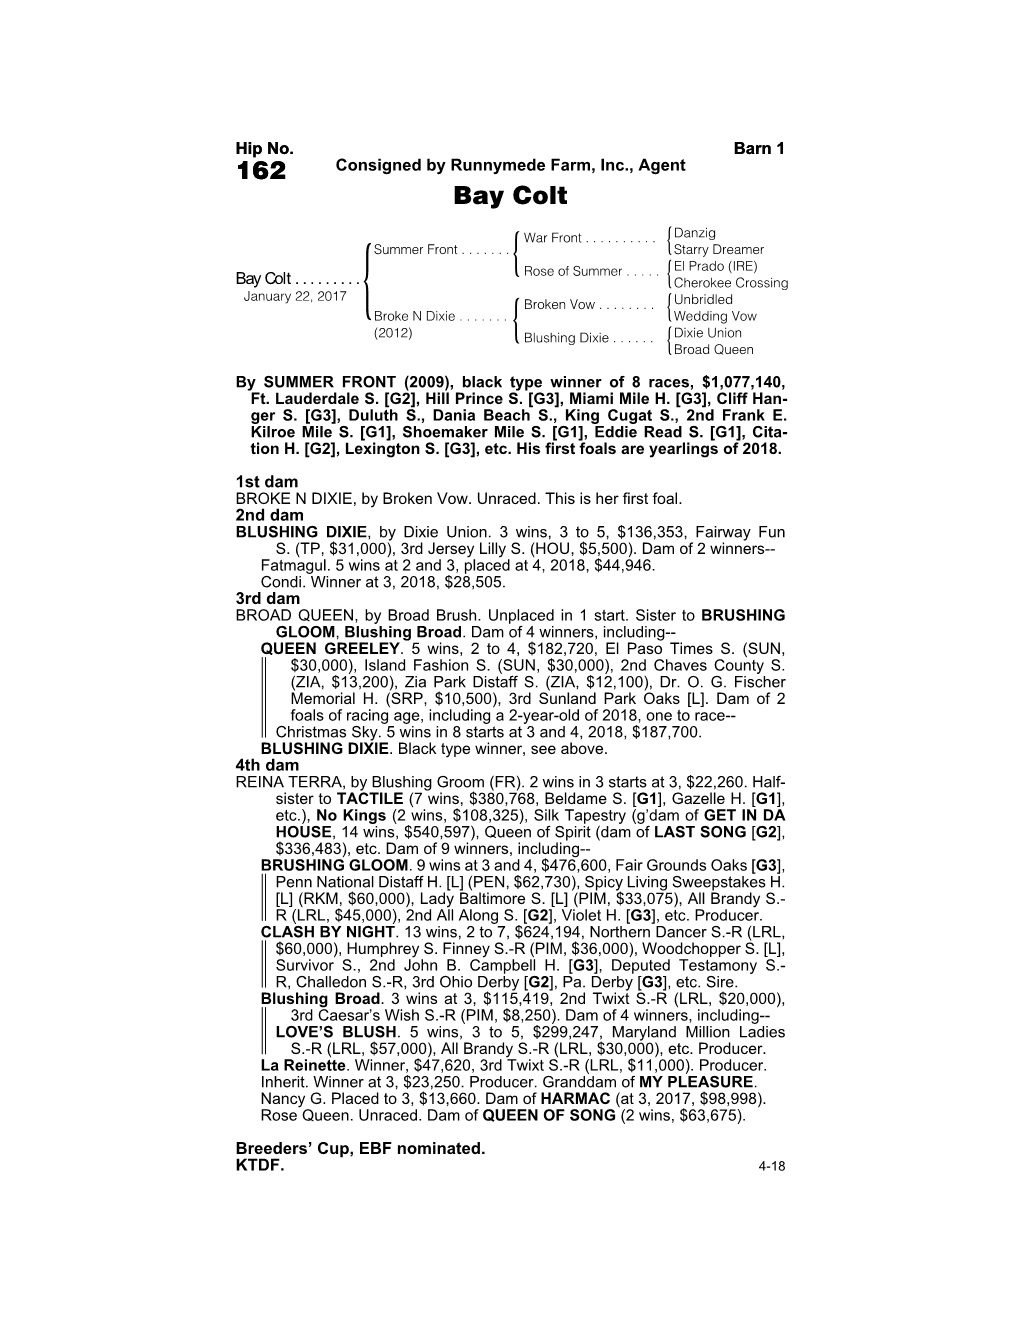 162 Consigned by Runnymede Farm, Inc., Agent Bay Colt